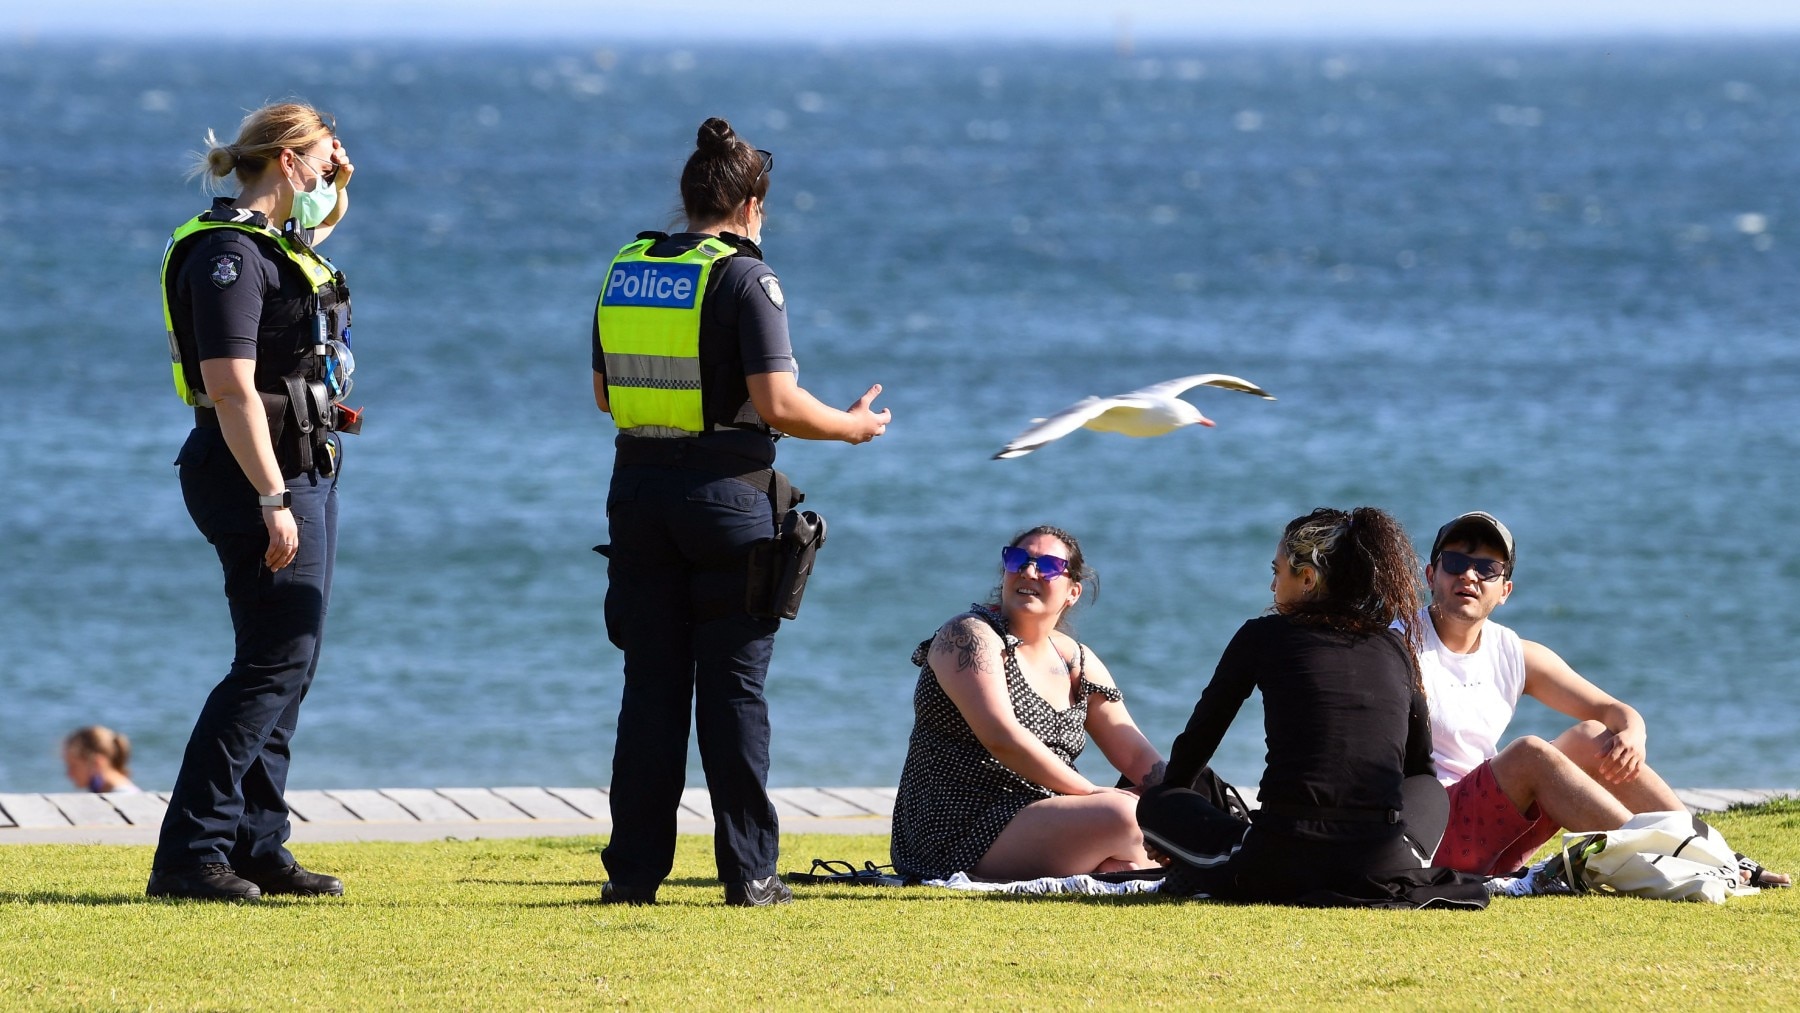 police melb restrictions  WILLIAM WEST_AFP via Getty Images-1235005431 (1)